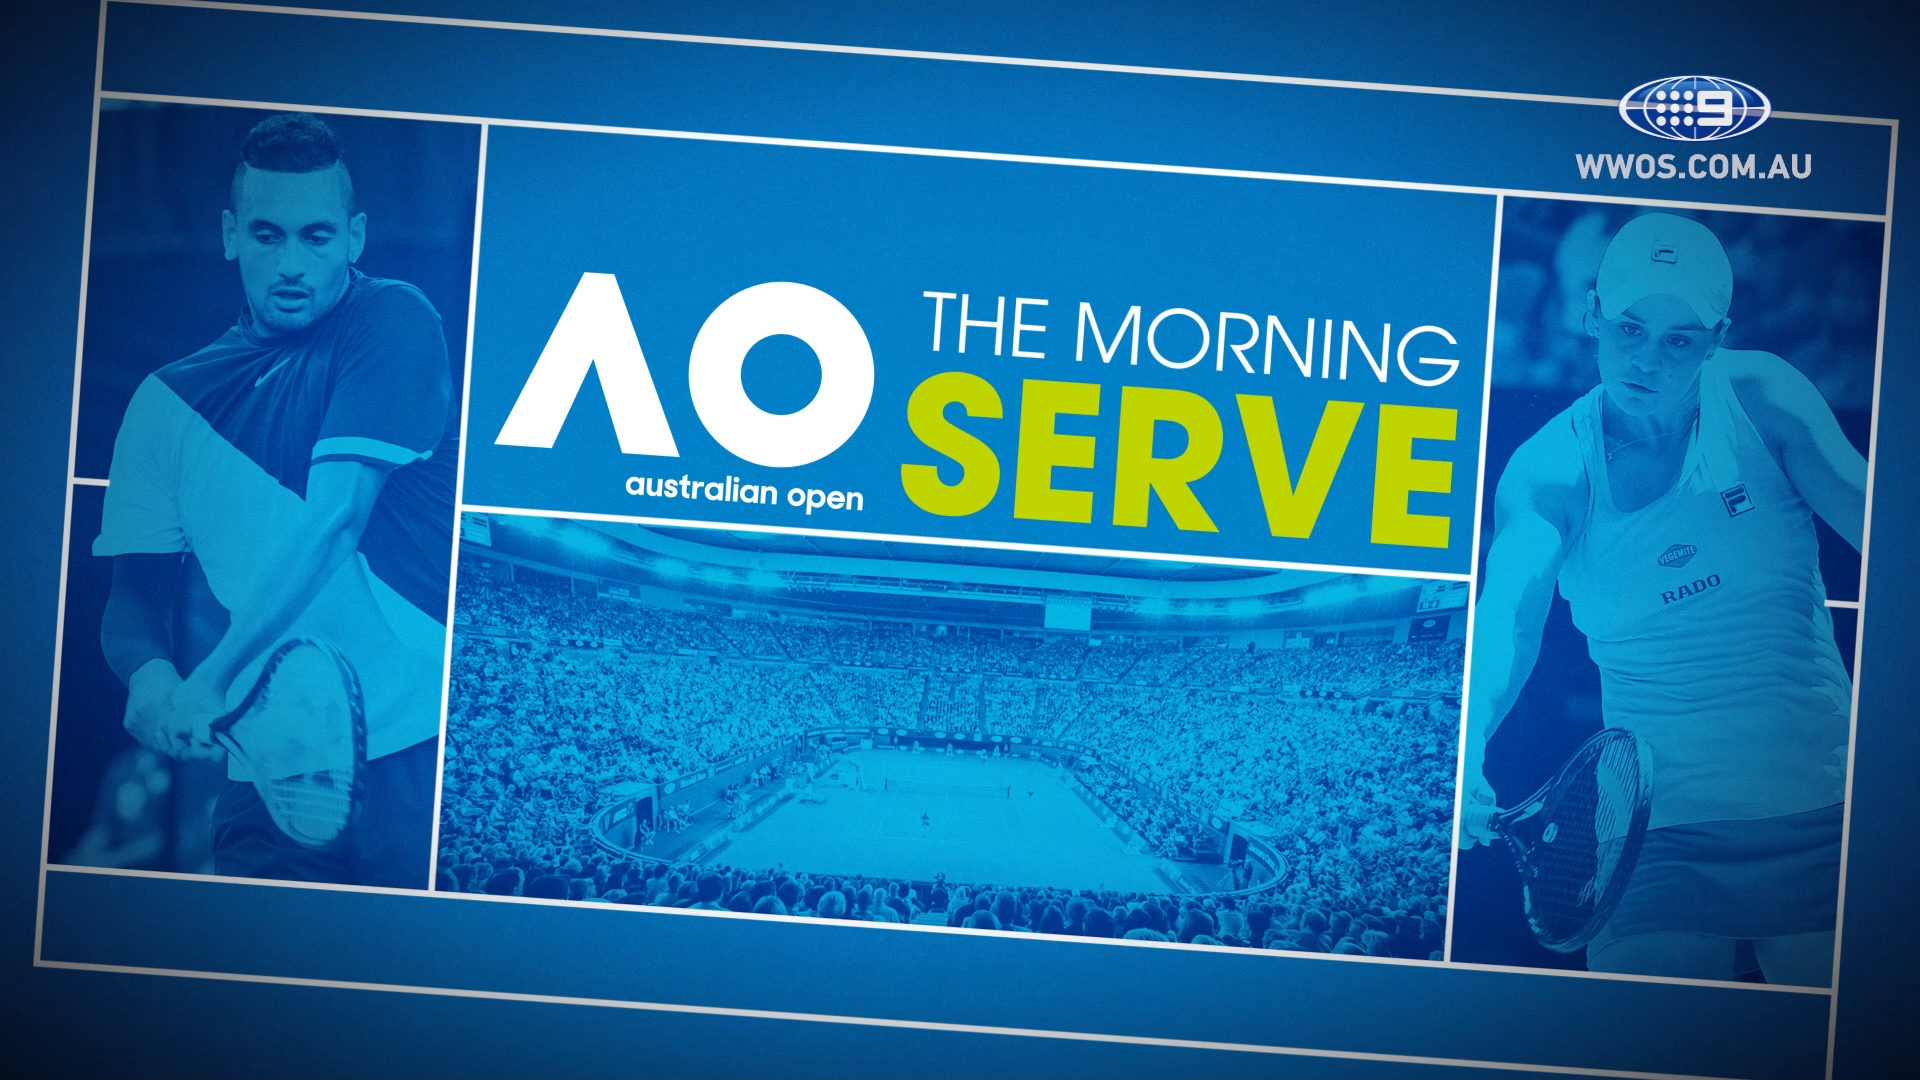 Barty's Open to win? - The Morning Serve Day 3